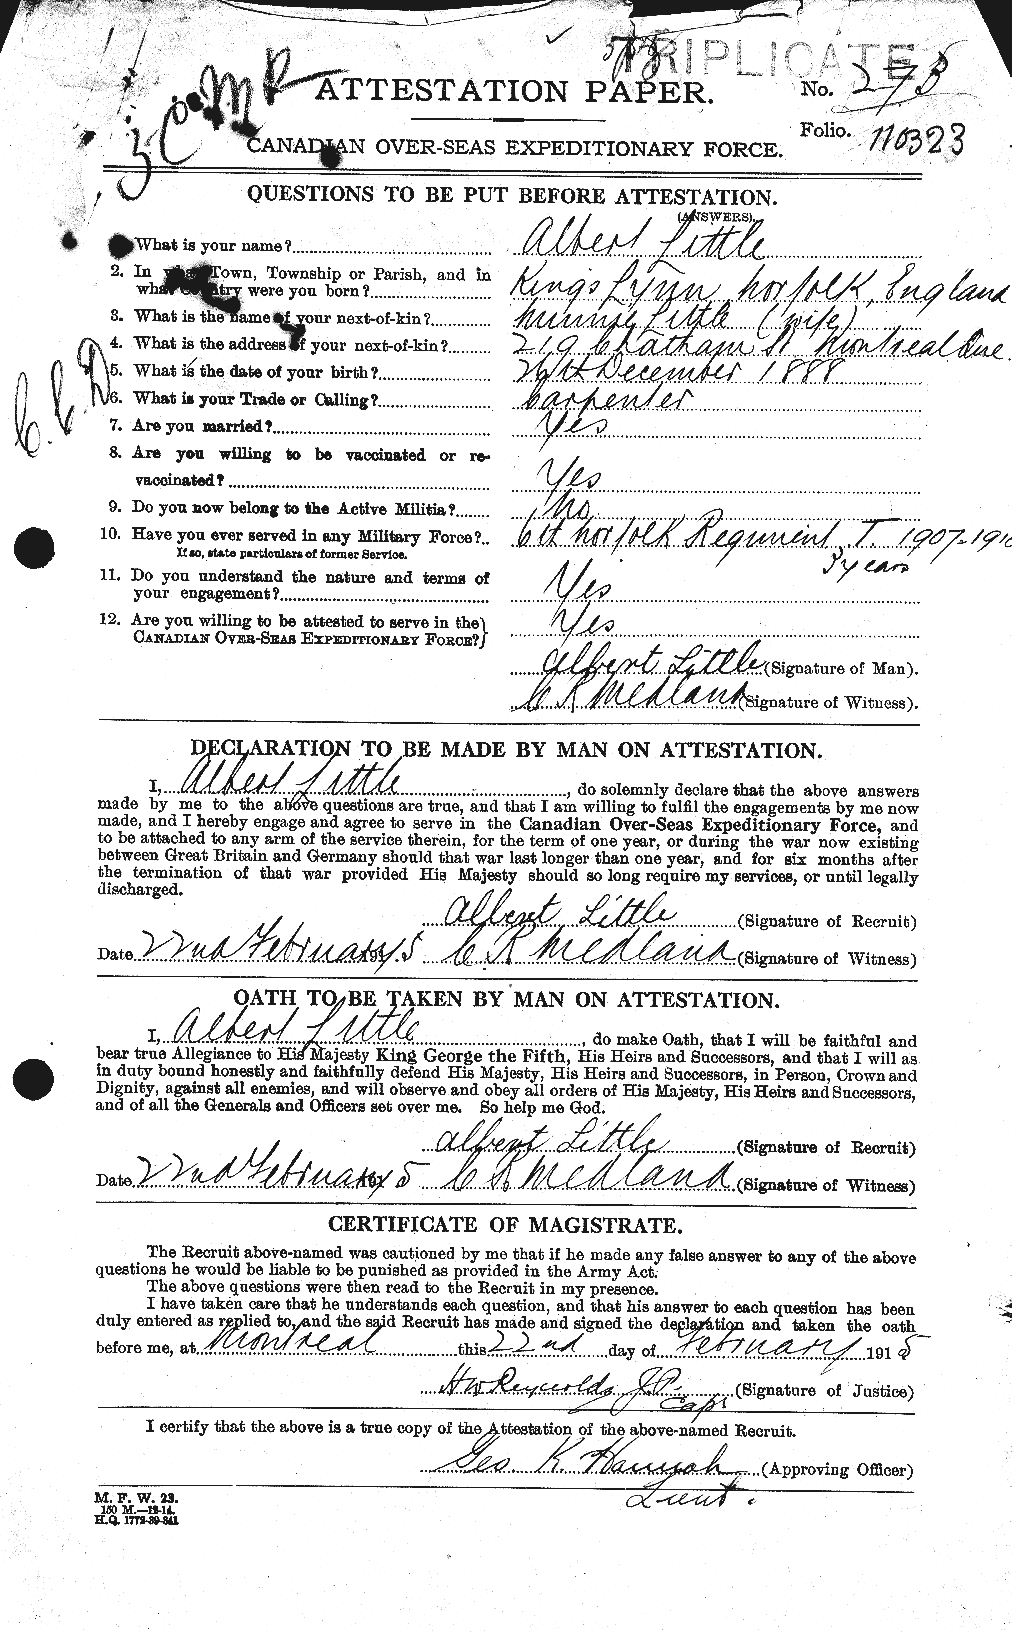 Personnel Records of the First World War - CEF 467166a